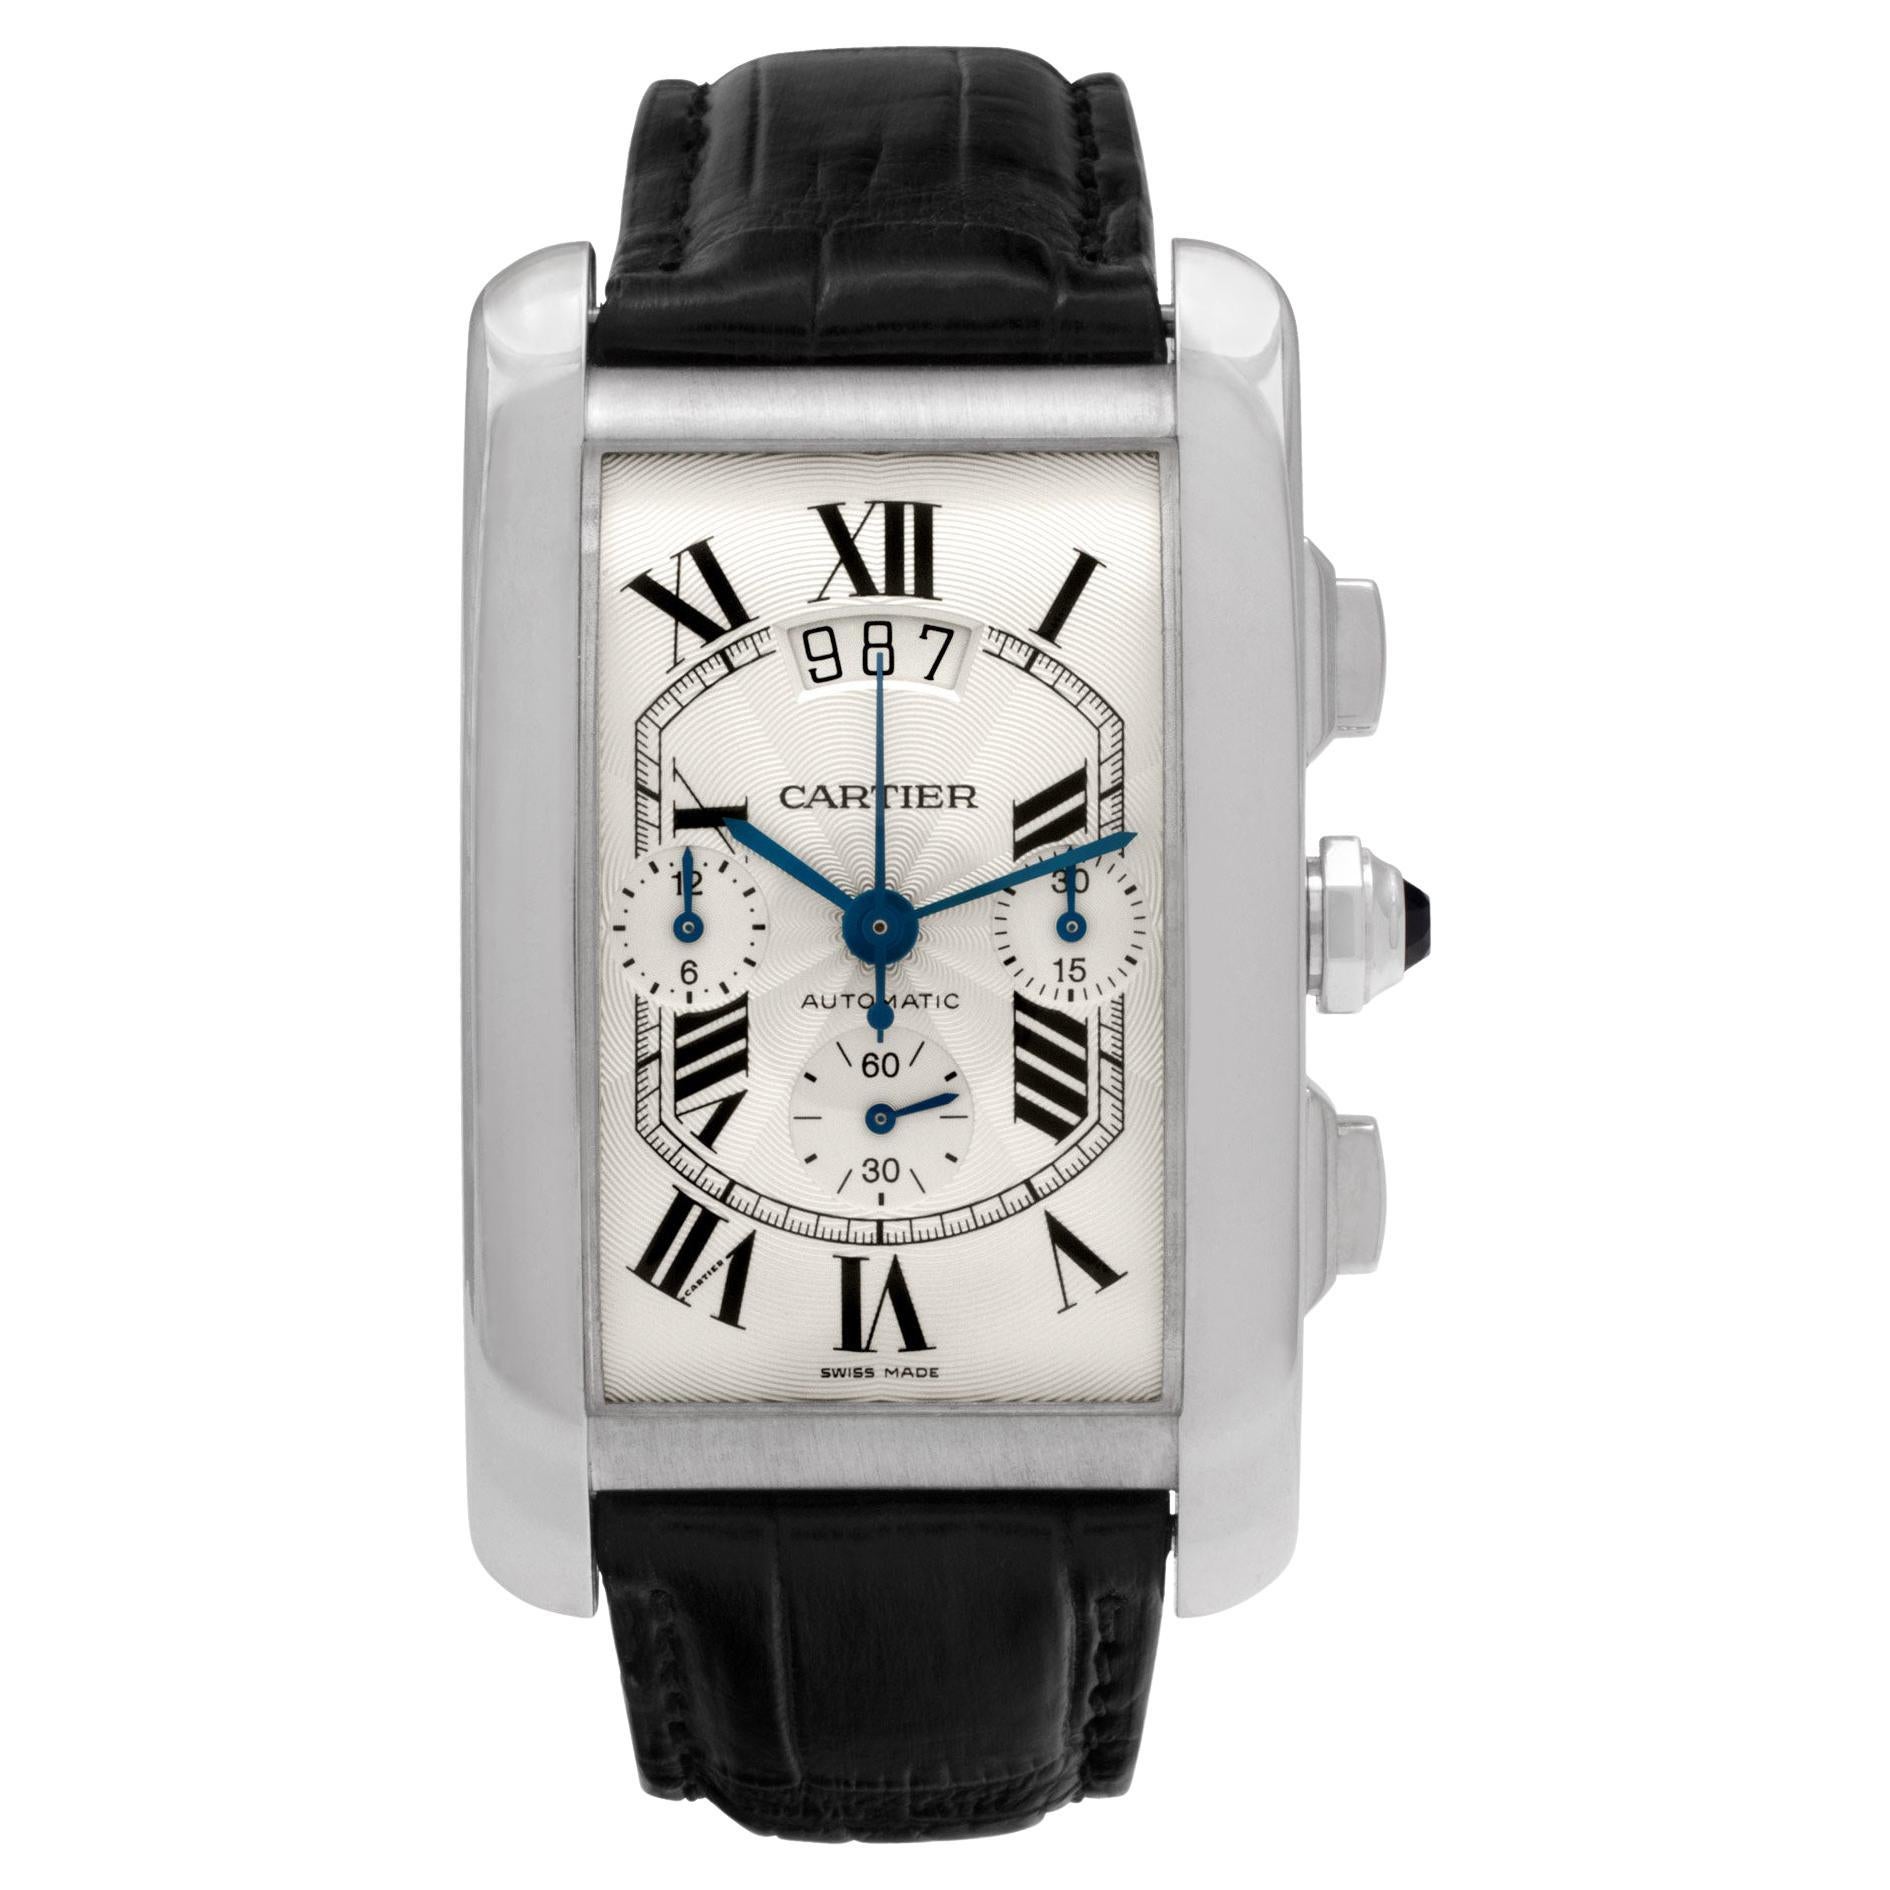 Cartier Tank Americaine in 18k White Gold Watch with Subseconds